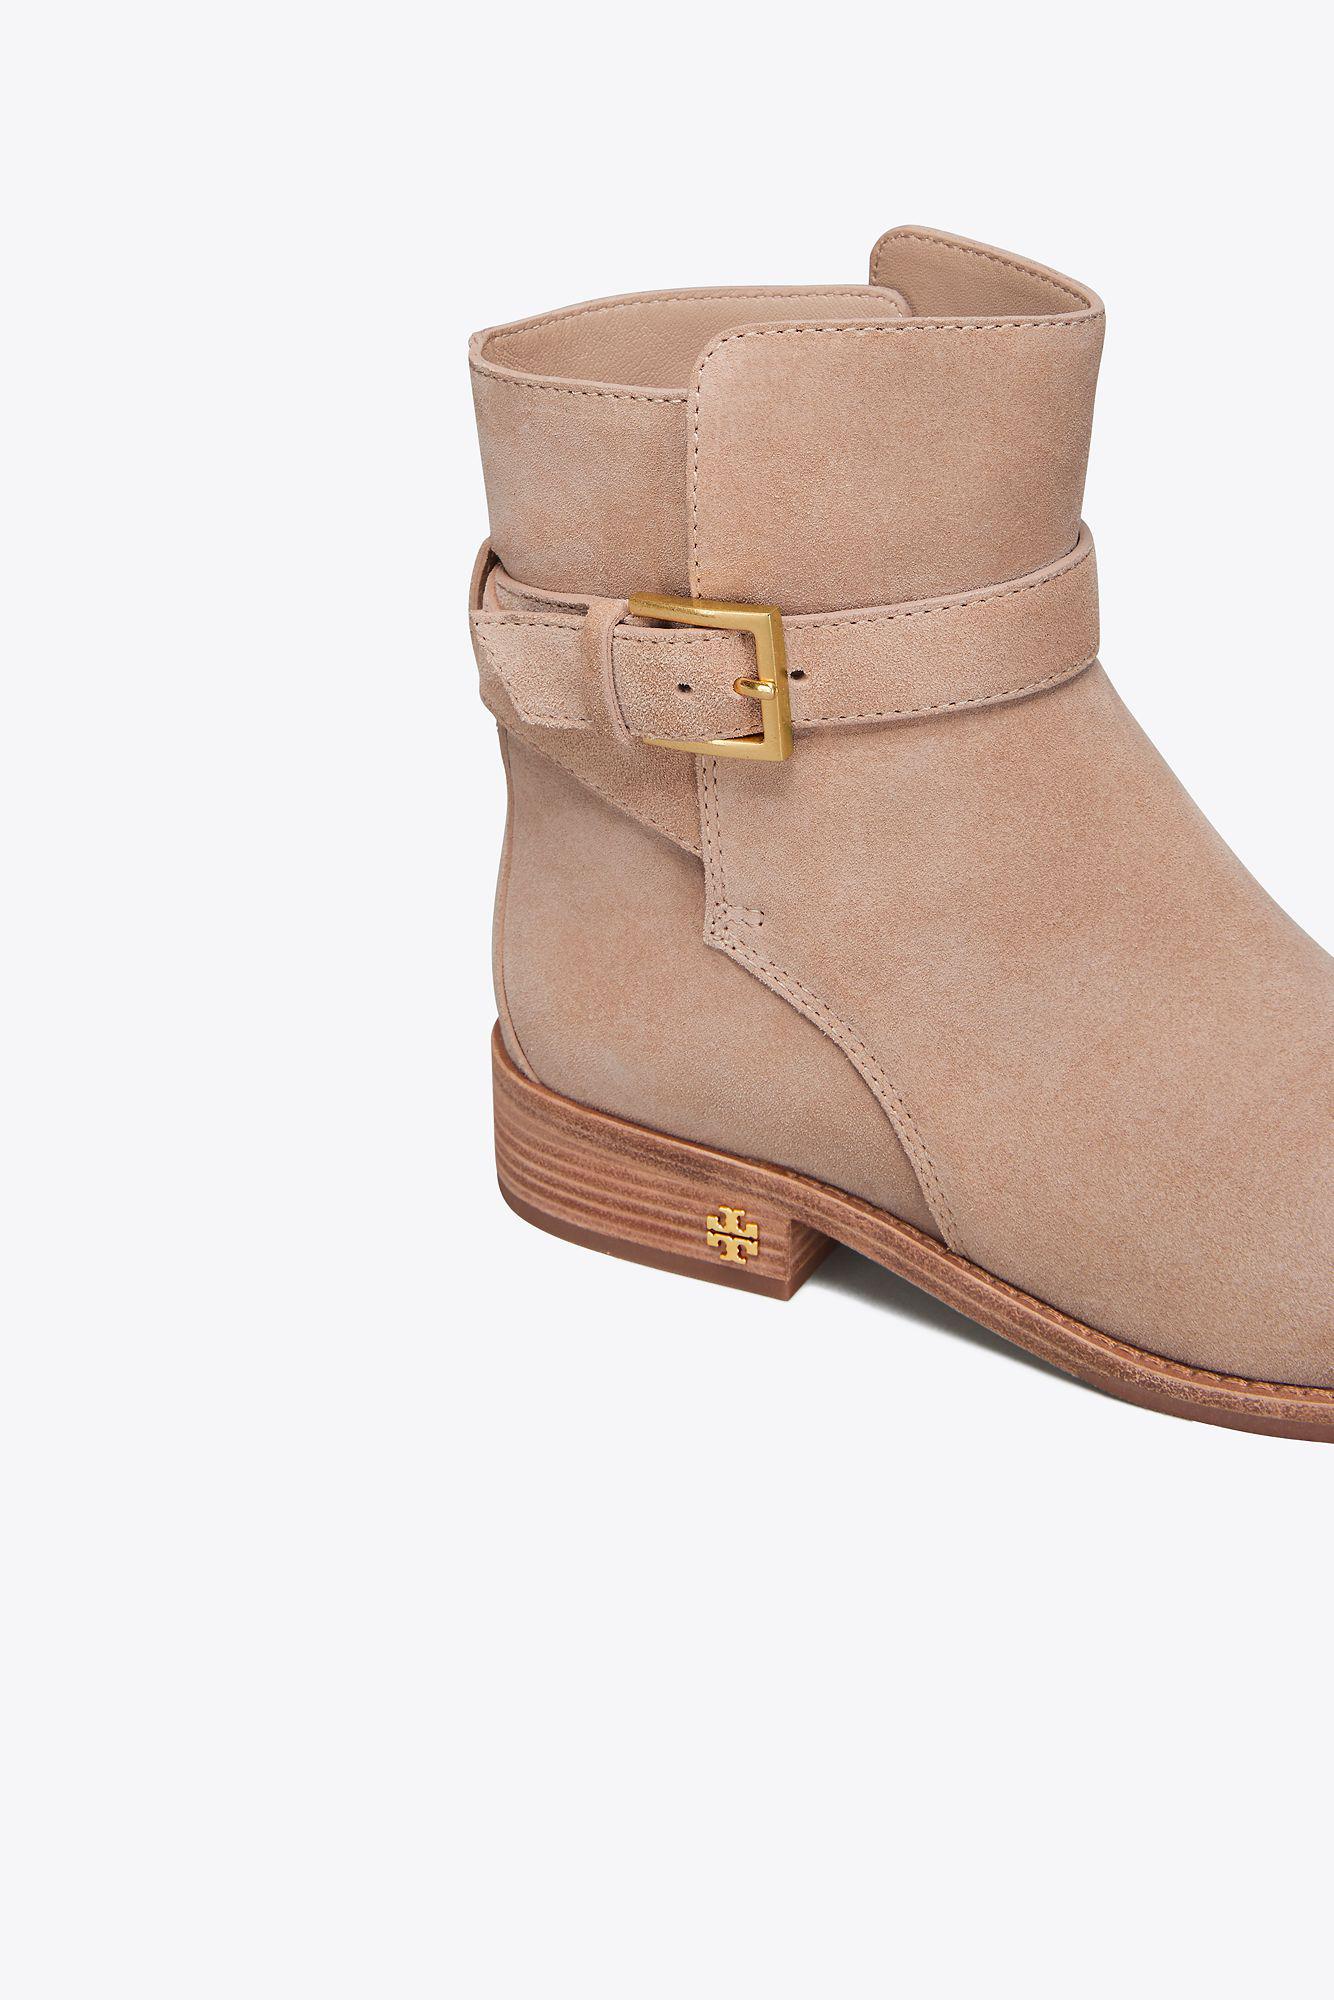 Tory Burch Brooke Ankle Bootie in Natural | Lyst